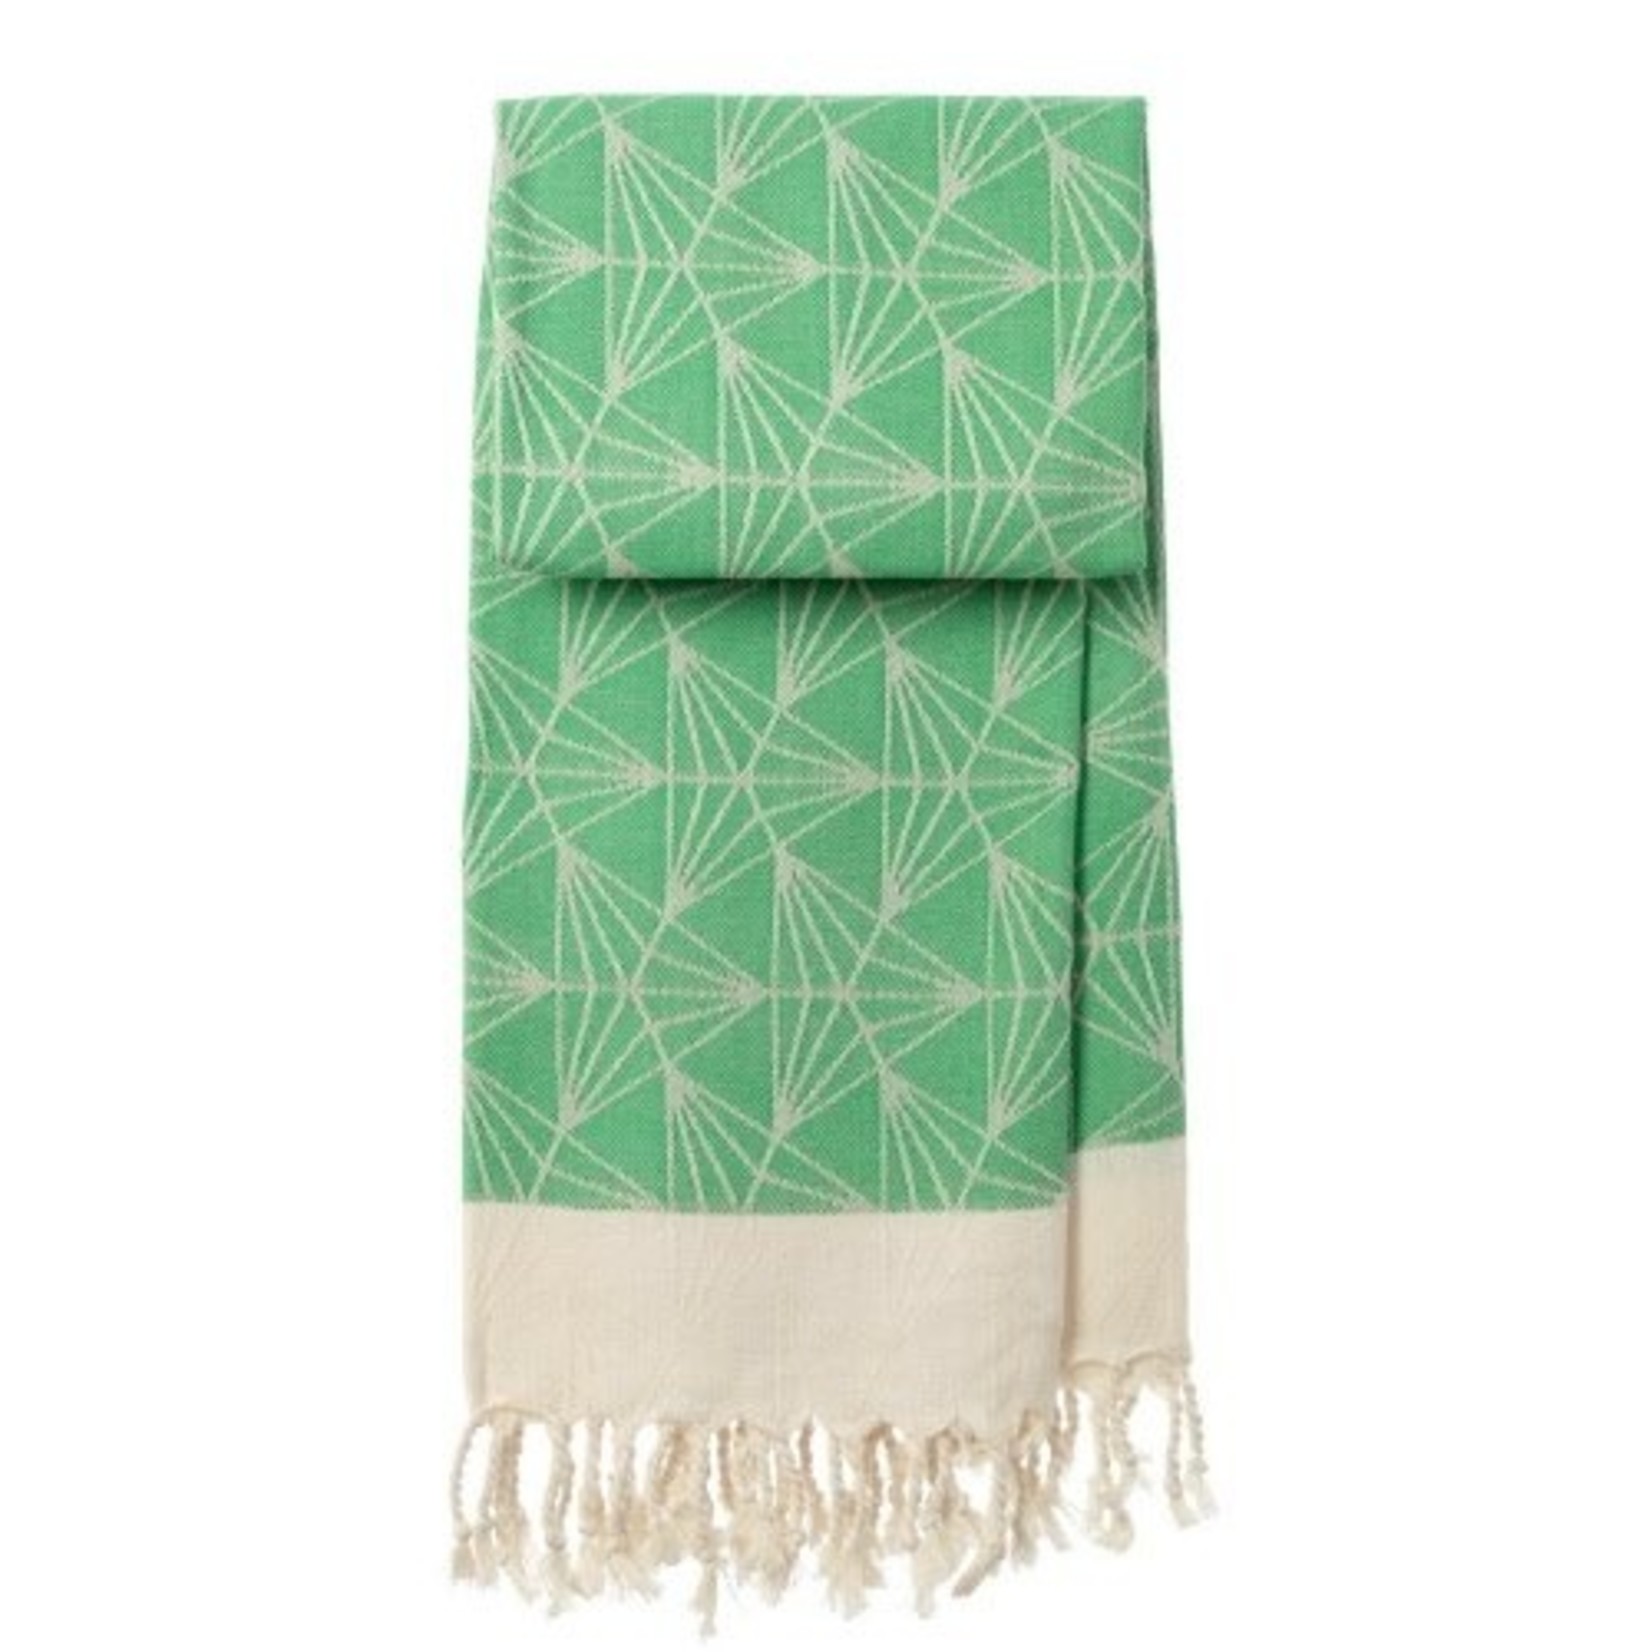 MOCCO | Made of Cotton Co. hamamdoek Triangle - green